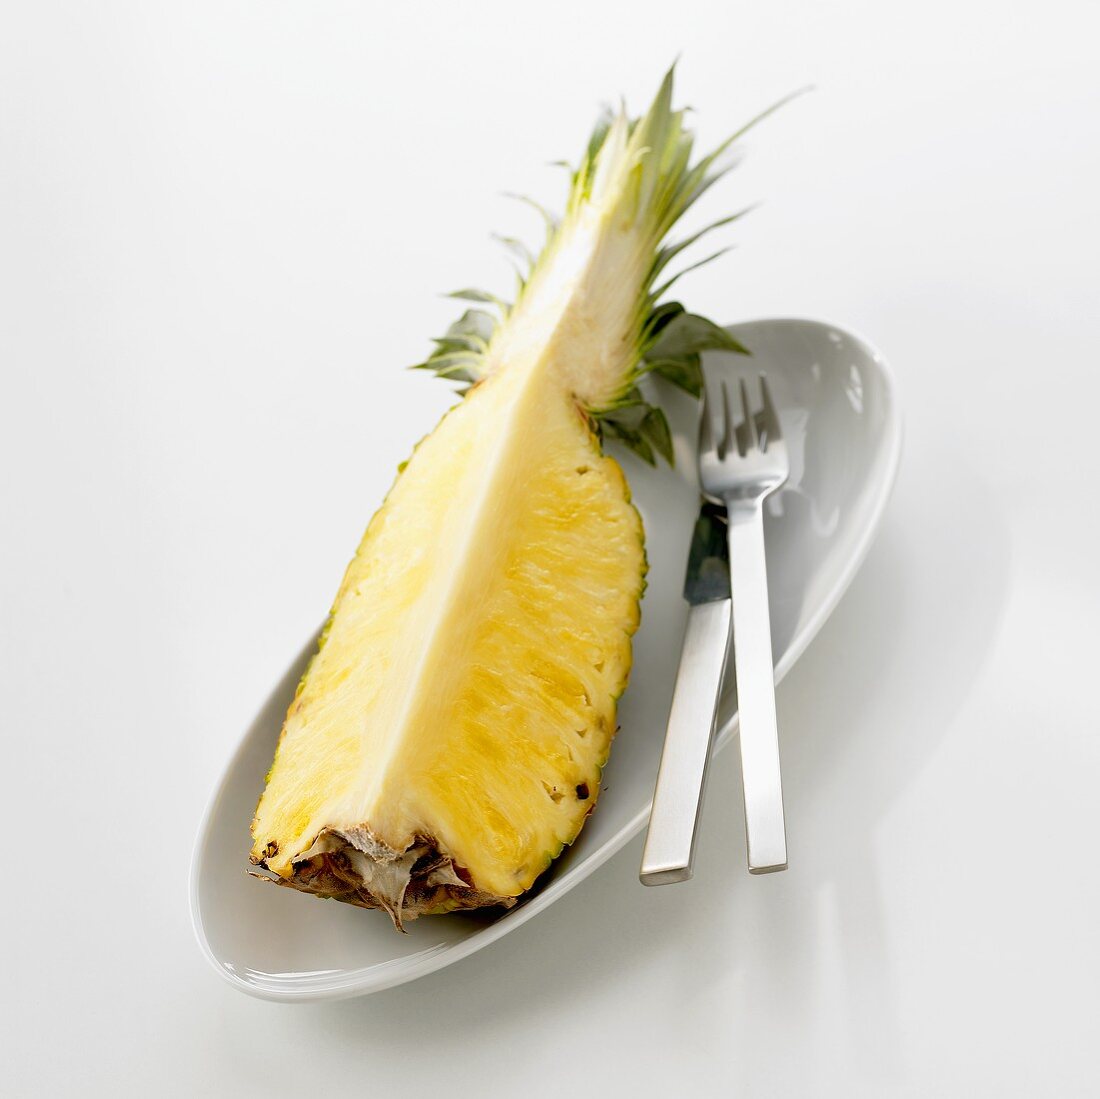 Pineapple quarter in dish with knife and fork